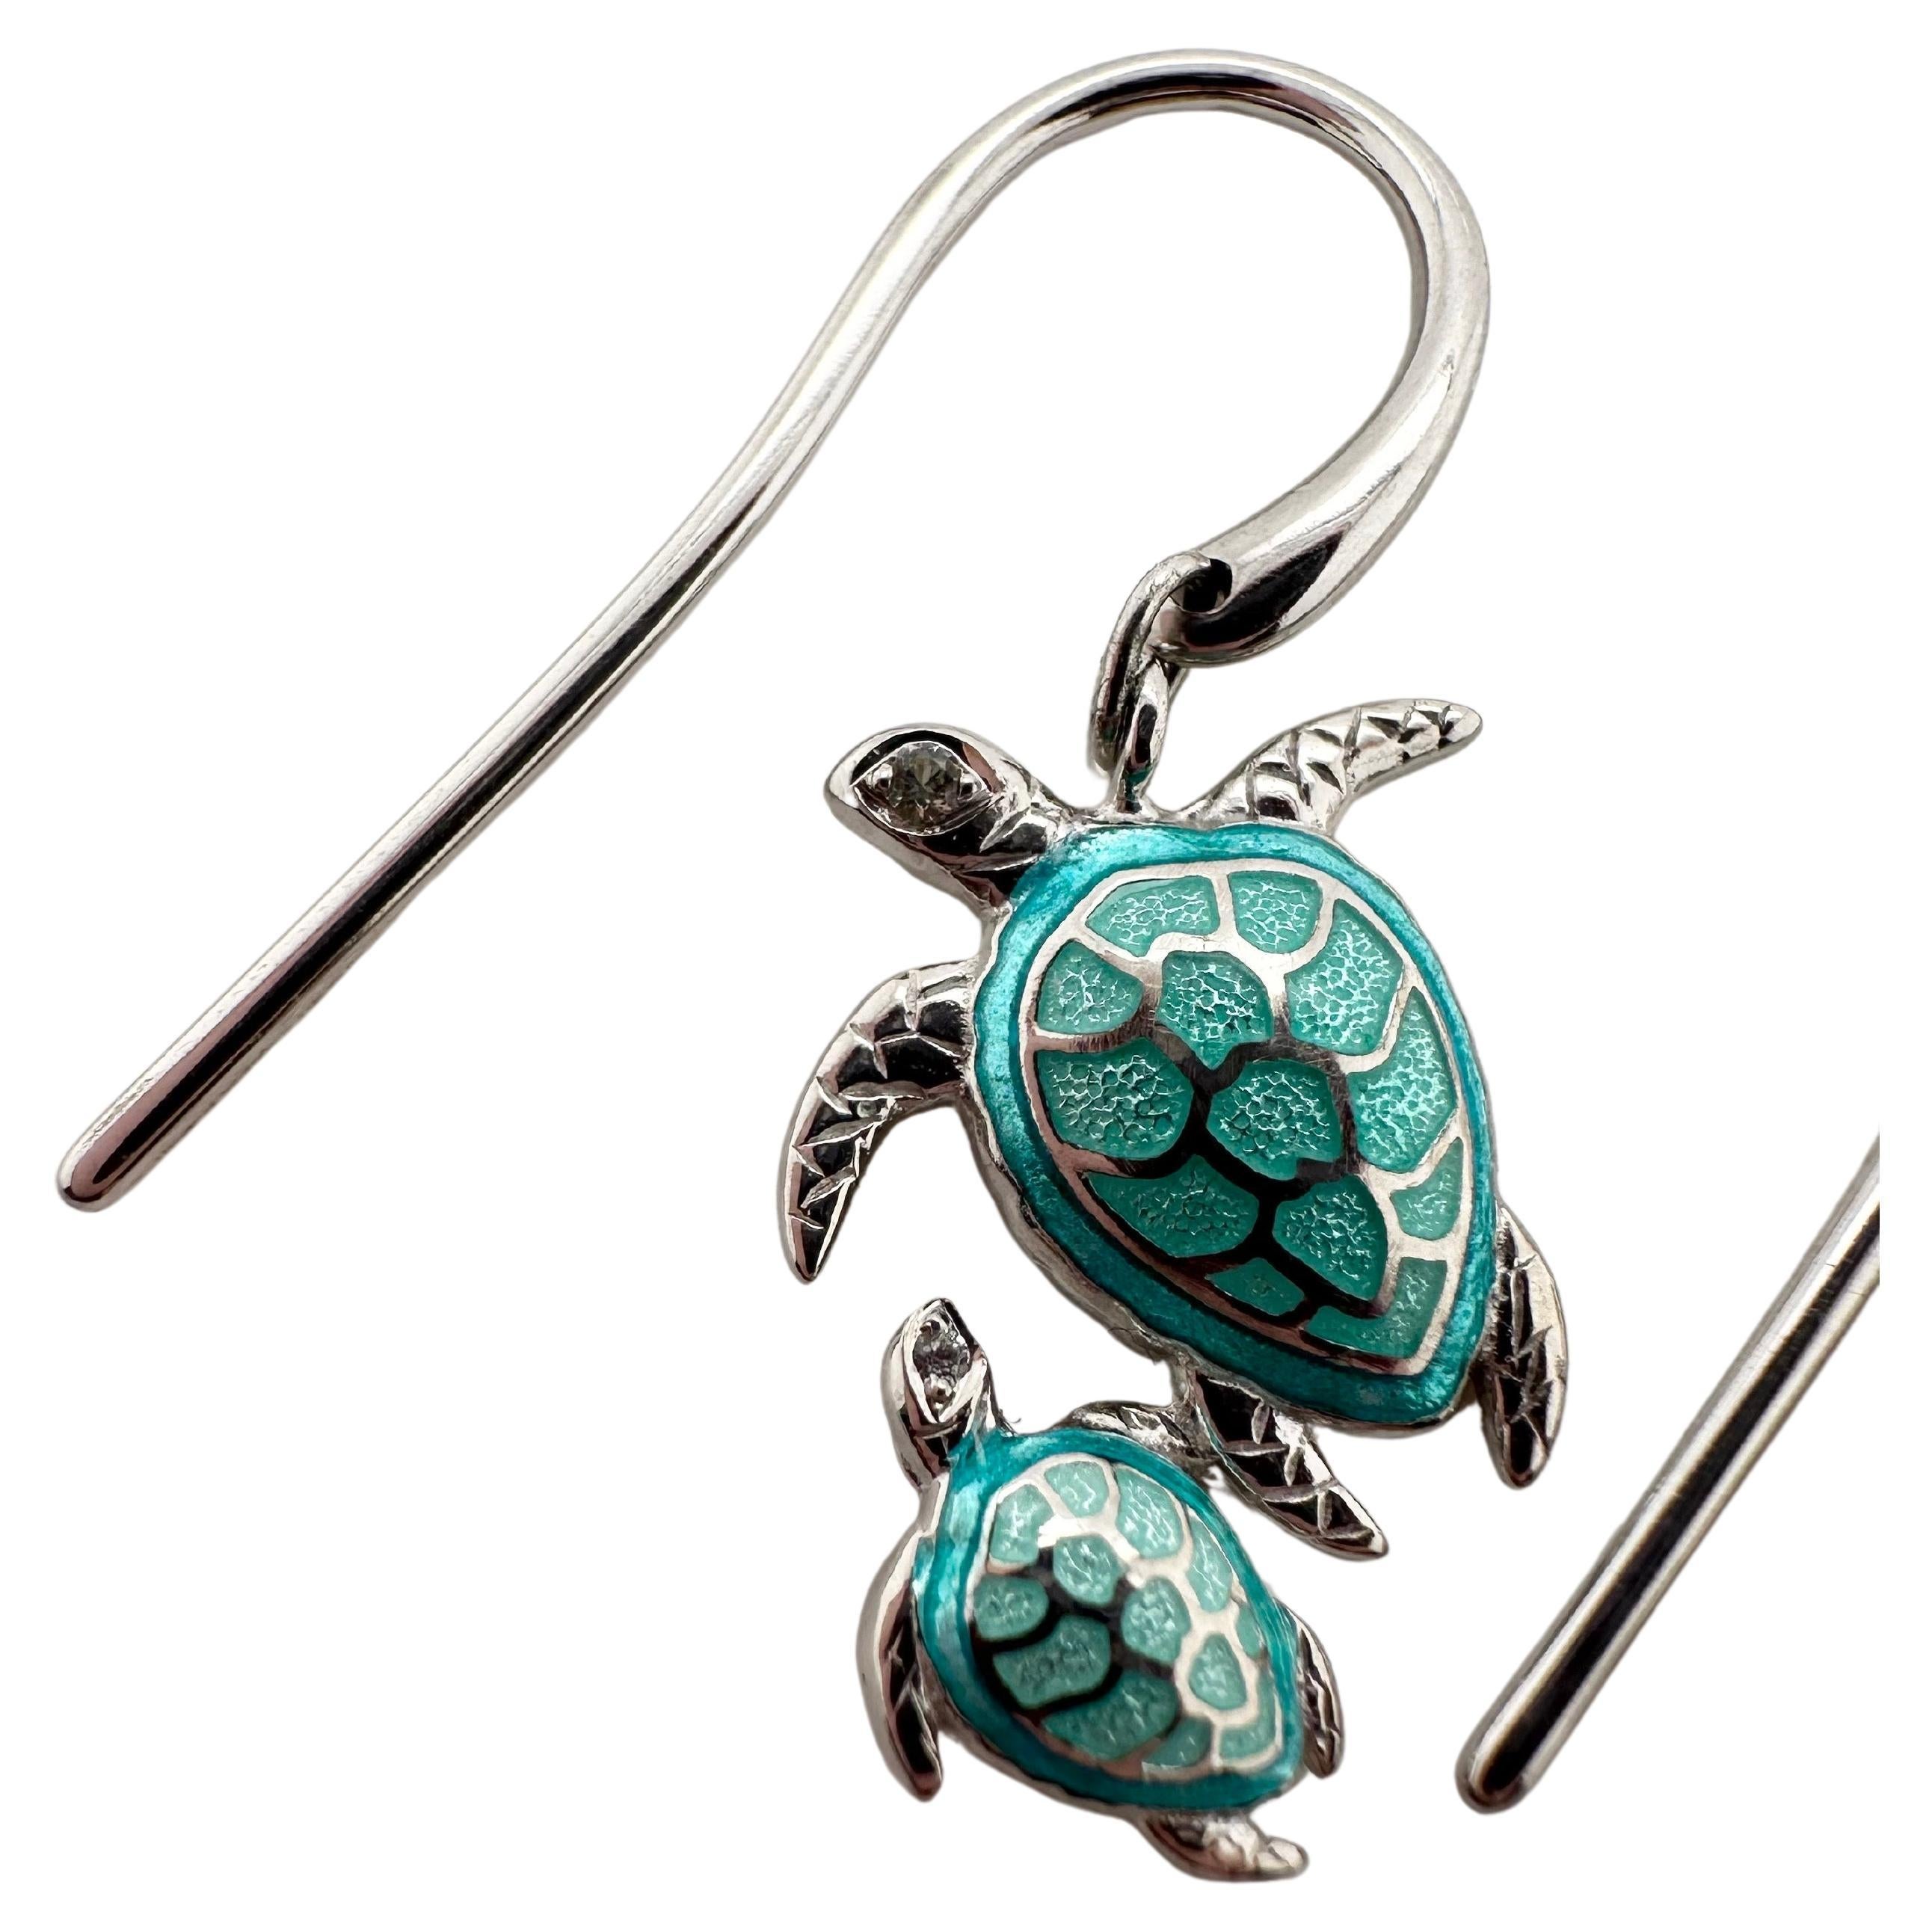 Stunning earrings with a beautiful powerful message the bond between a child and mother is nothing close to any other bond! These earrings come with rare enamel and natural diamonds made in 925 silver and super long secure earrings fish hook. They